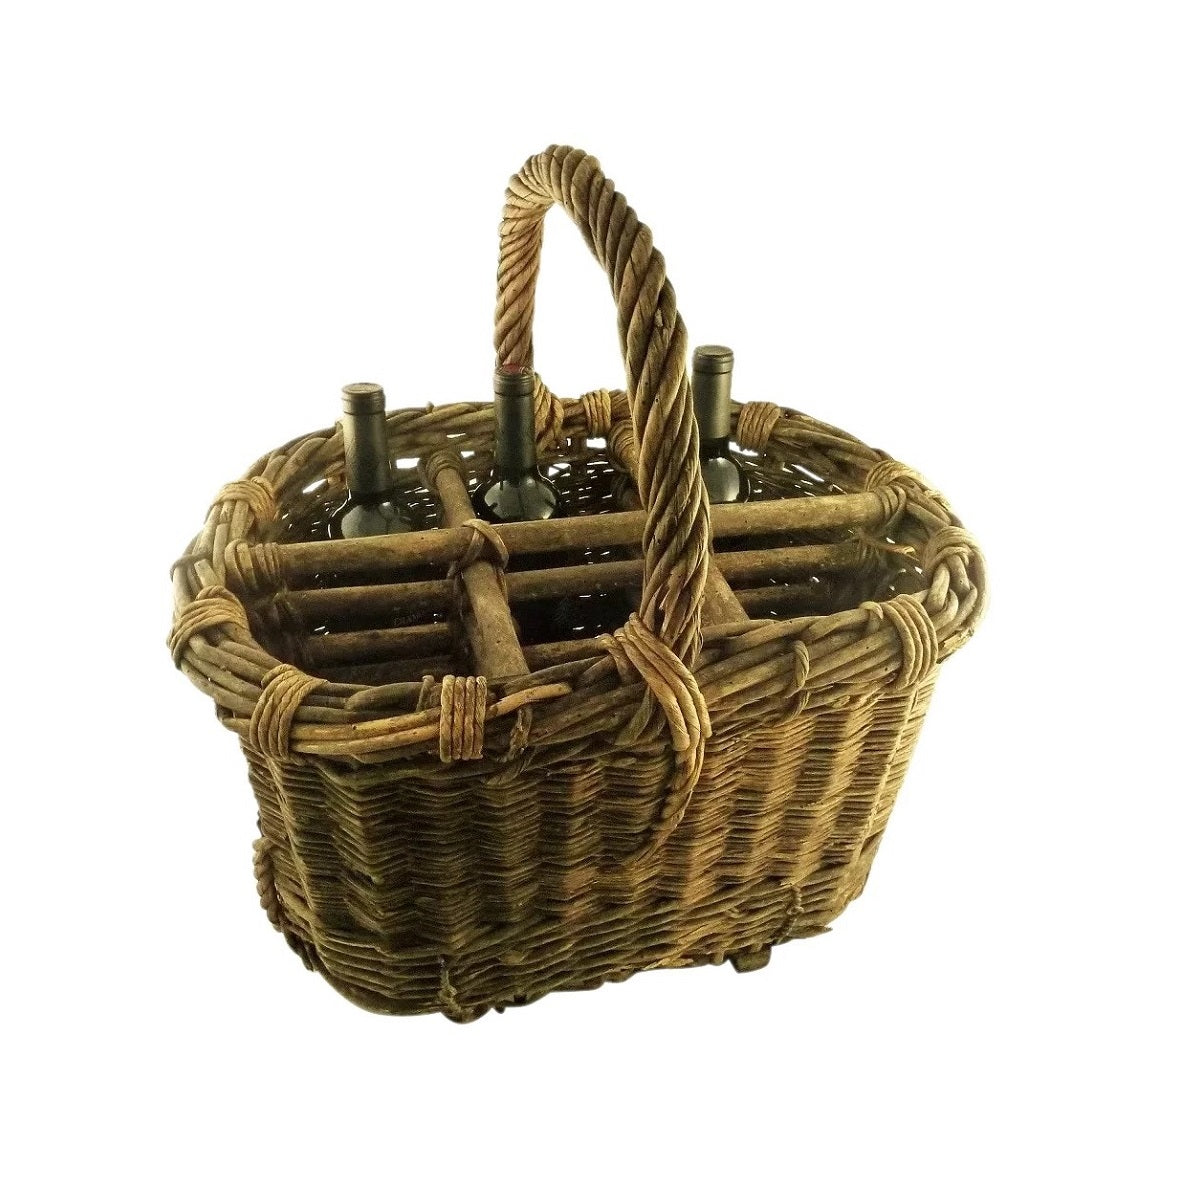 Antique French Provincial Wicker Wine Basket or Carrier - 43 Chesapeake Court Antiques